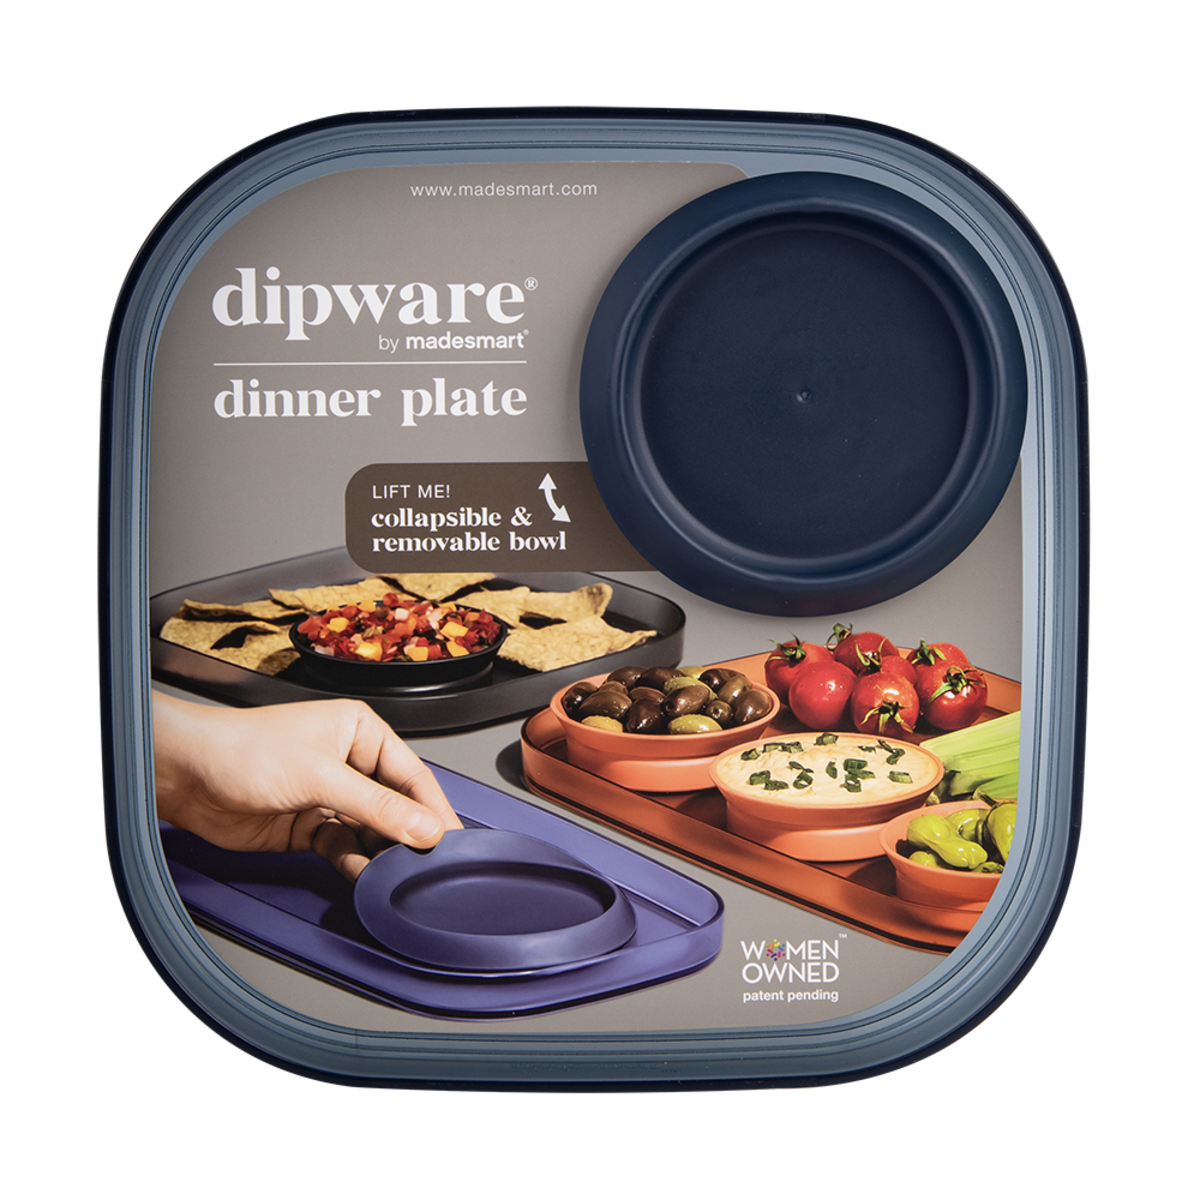 Madesmart® Dipware® Dinner Plate With Bowl - 24x24cm - Midnight Blue